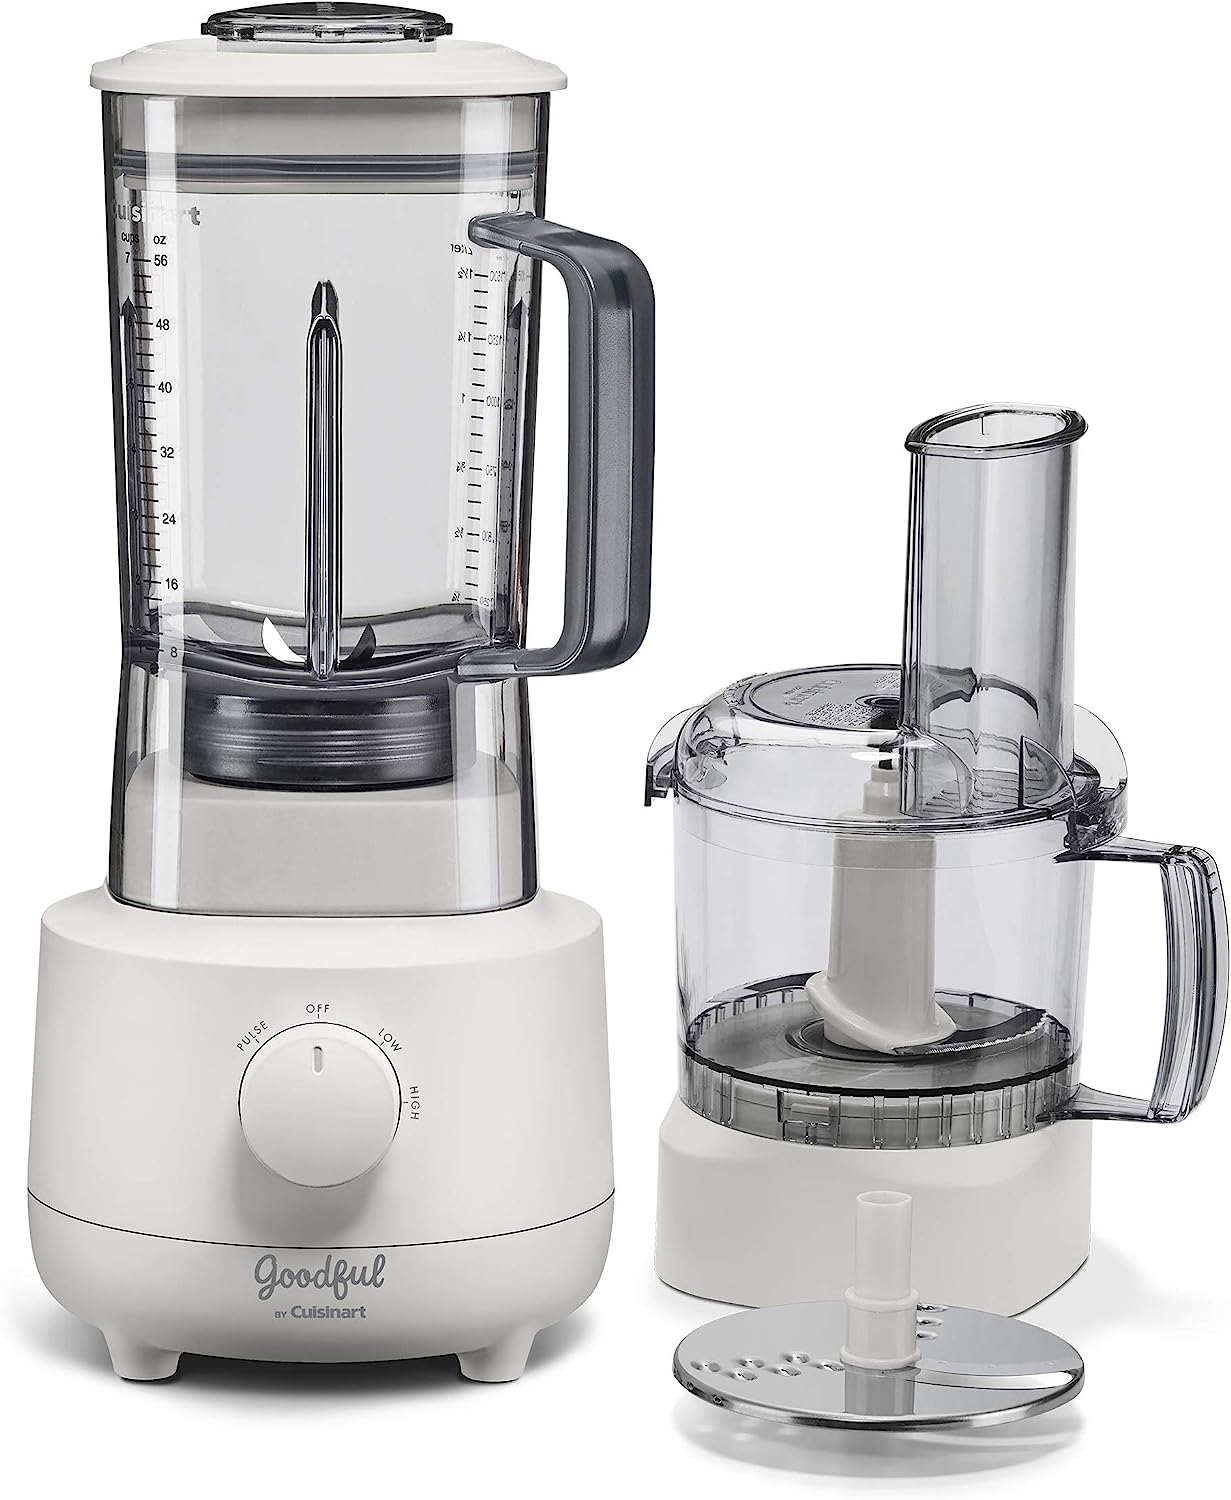 Cuisinart Goodful 3 Cup Mini Food Processor and 56 Ounce Blender